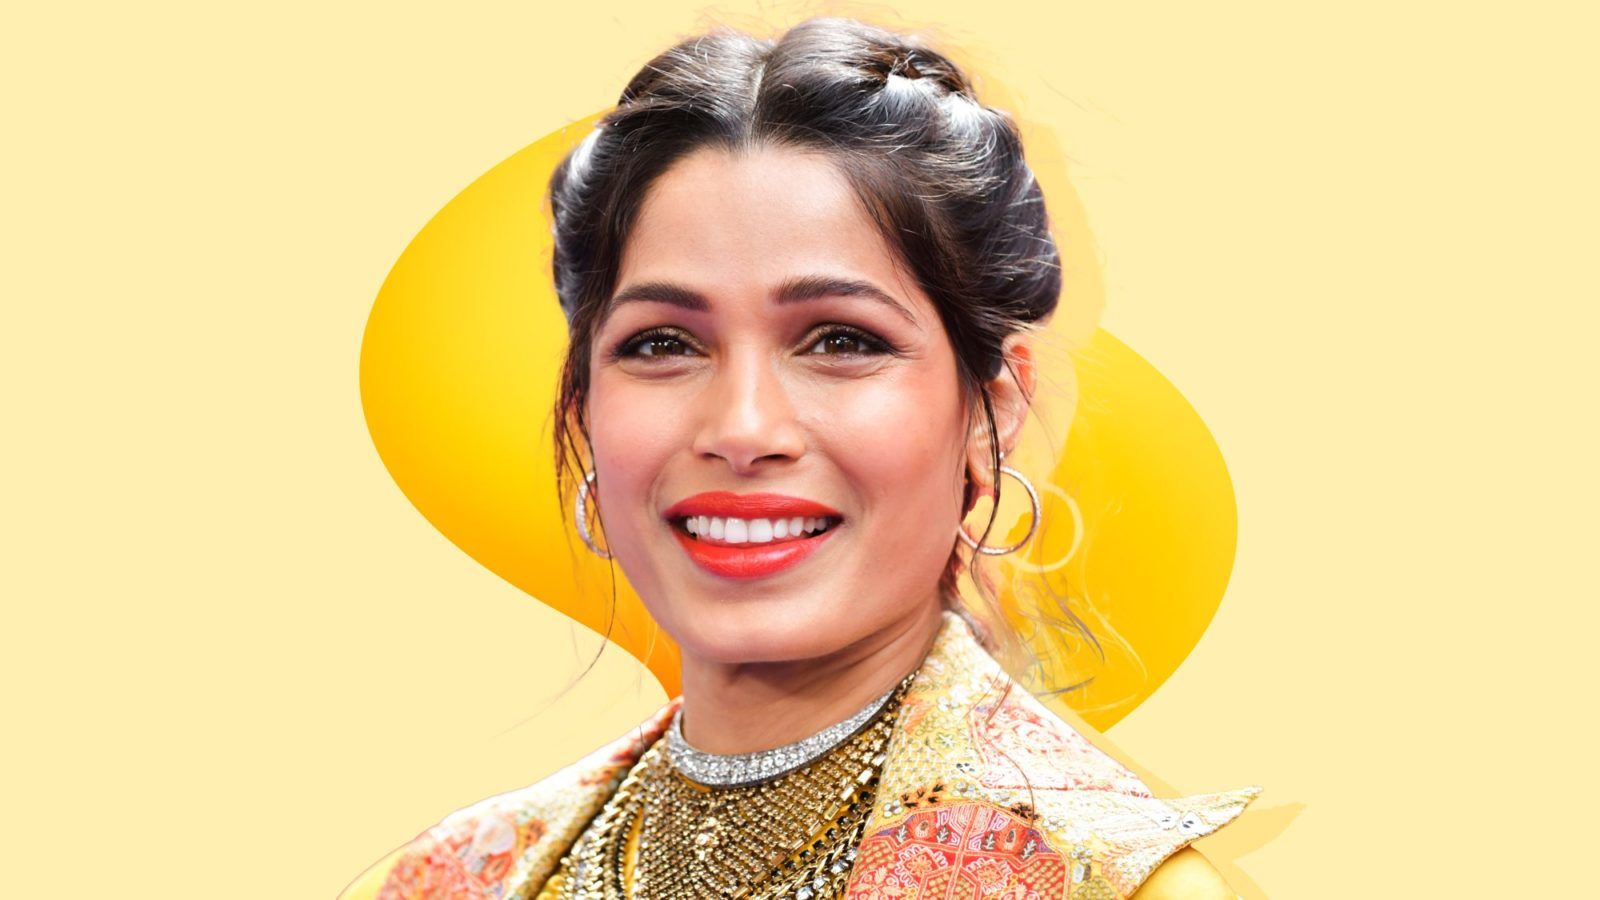 Freida Pinto gets real about her postpartum journey, calling it an ‘intense and wild’ ride